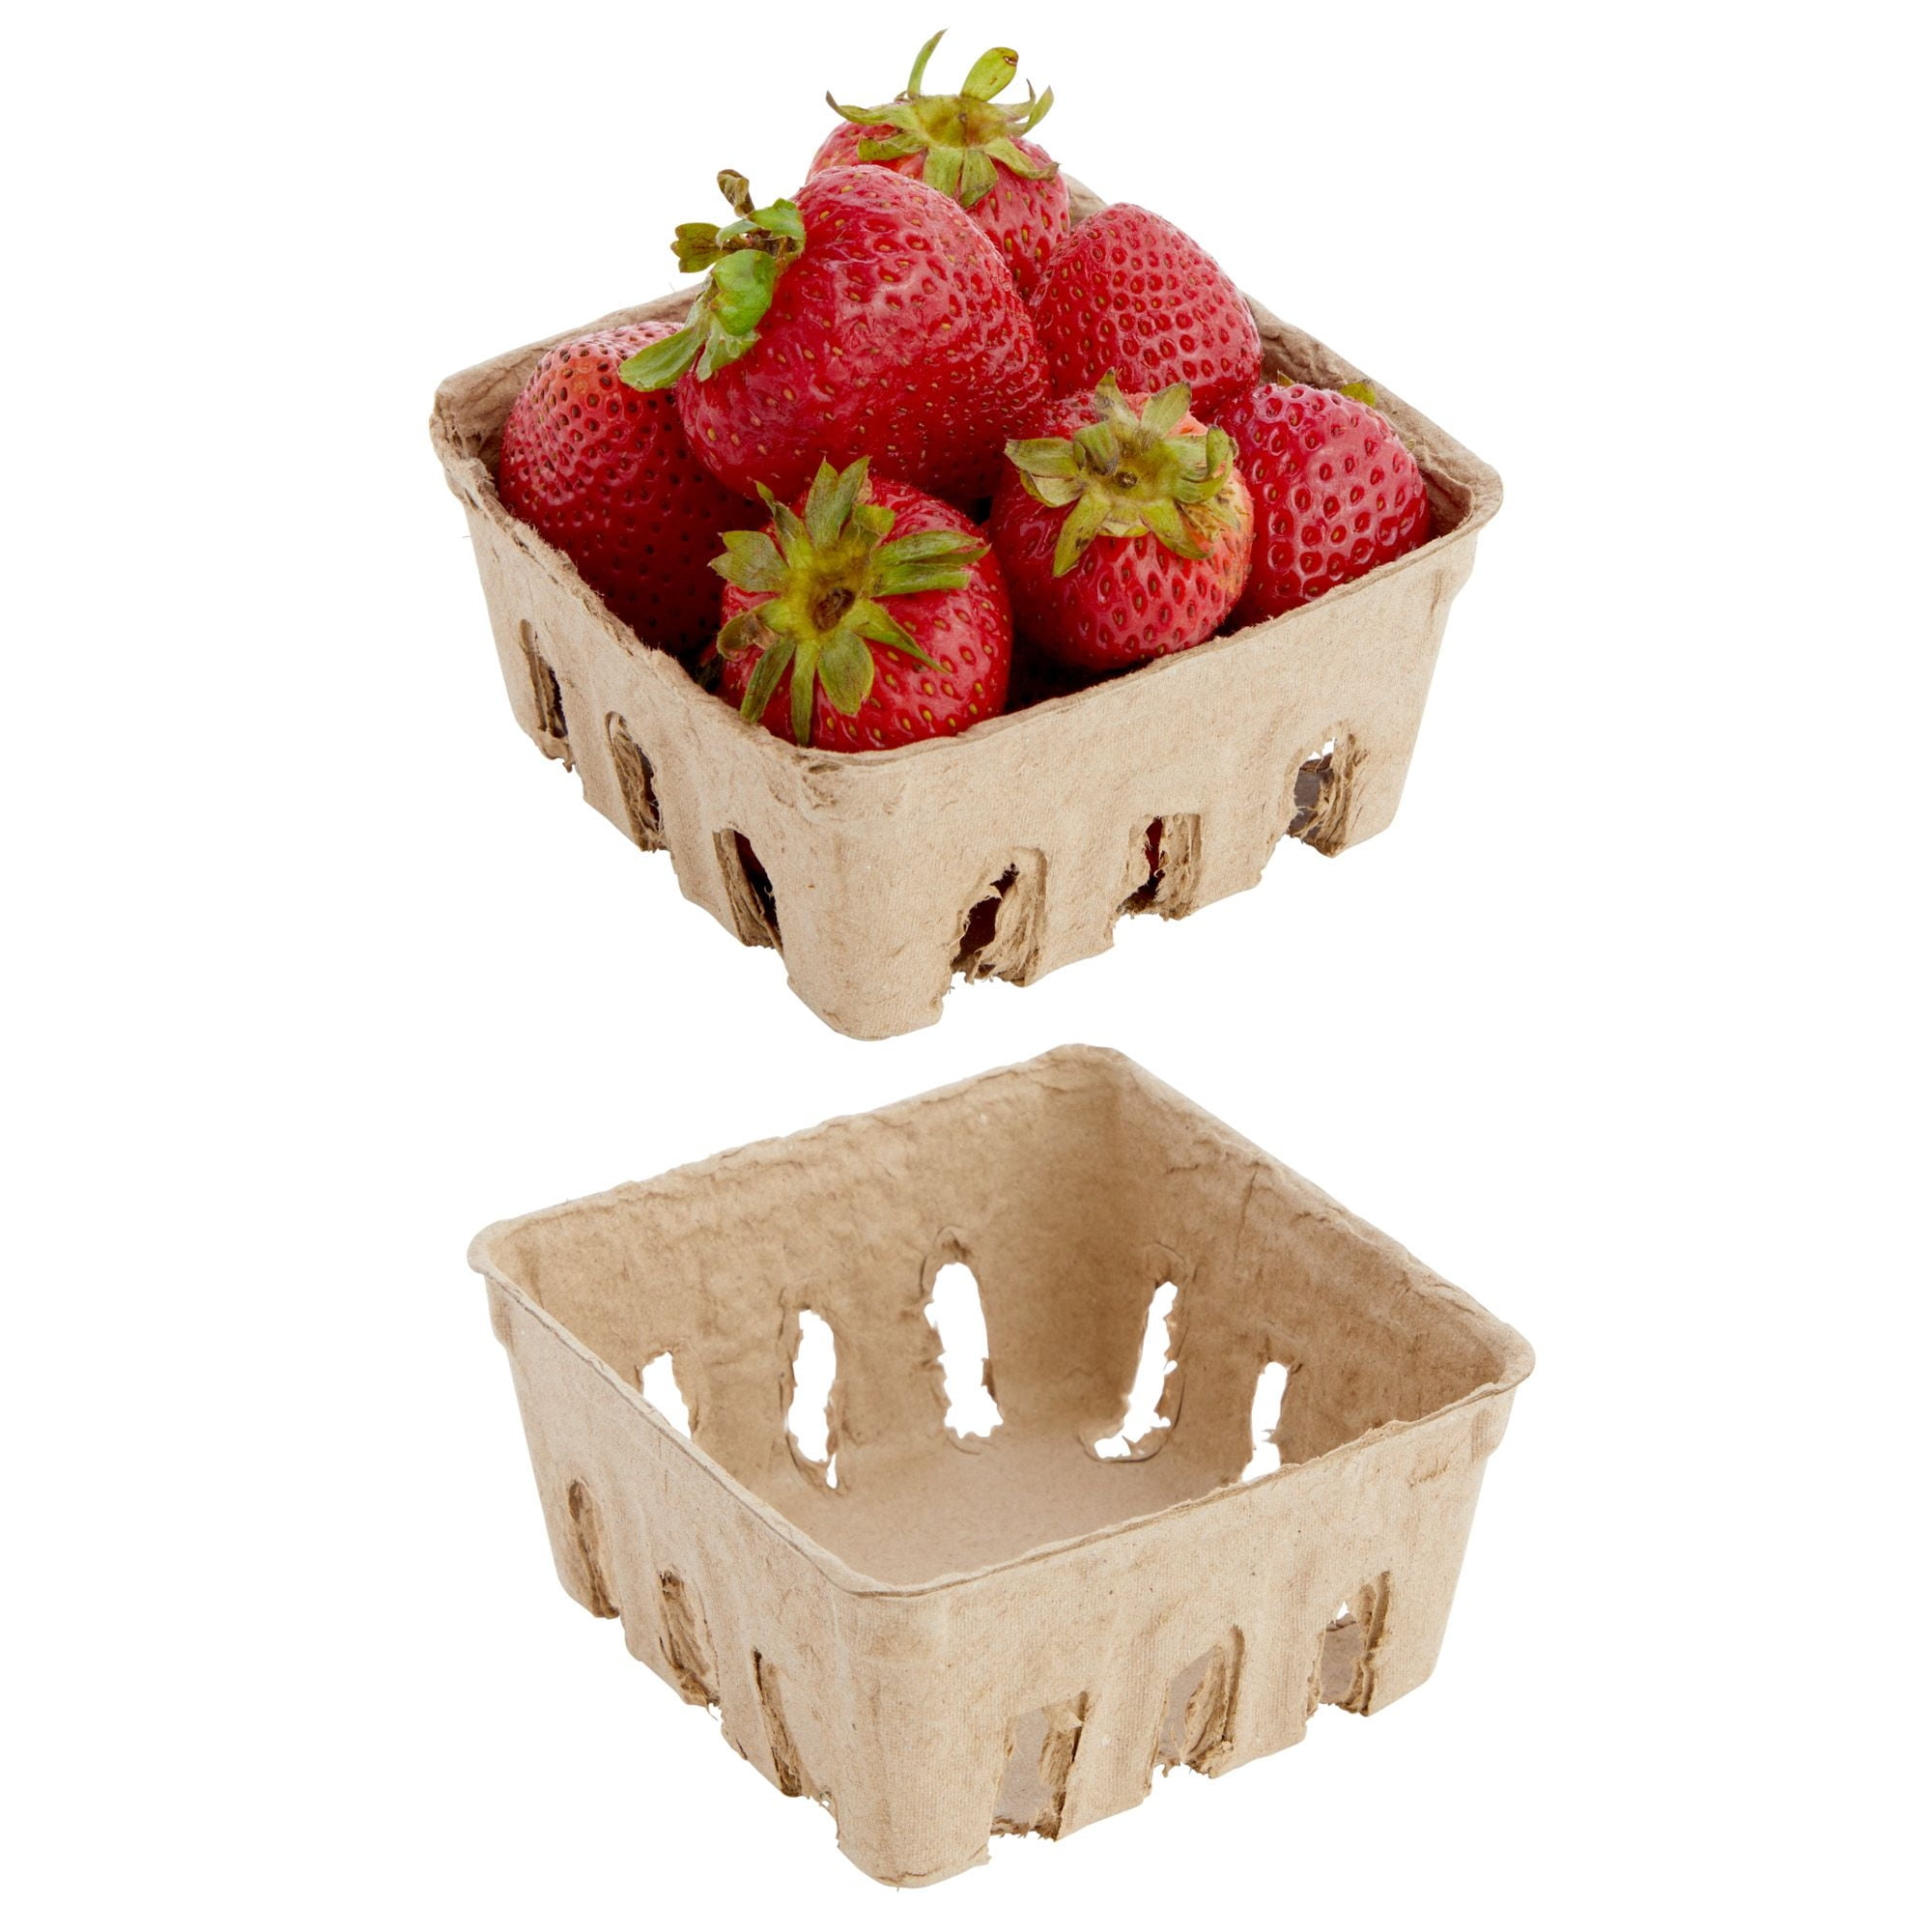 Chef'n Reusable Berry Basket, Set of 2, Holds 1 Pint, BPA-Free Plastic on  Food52